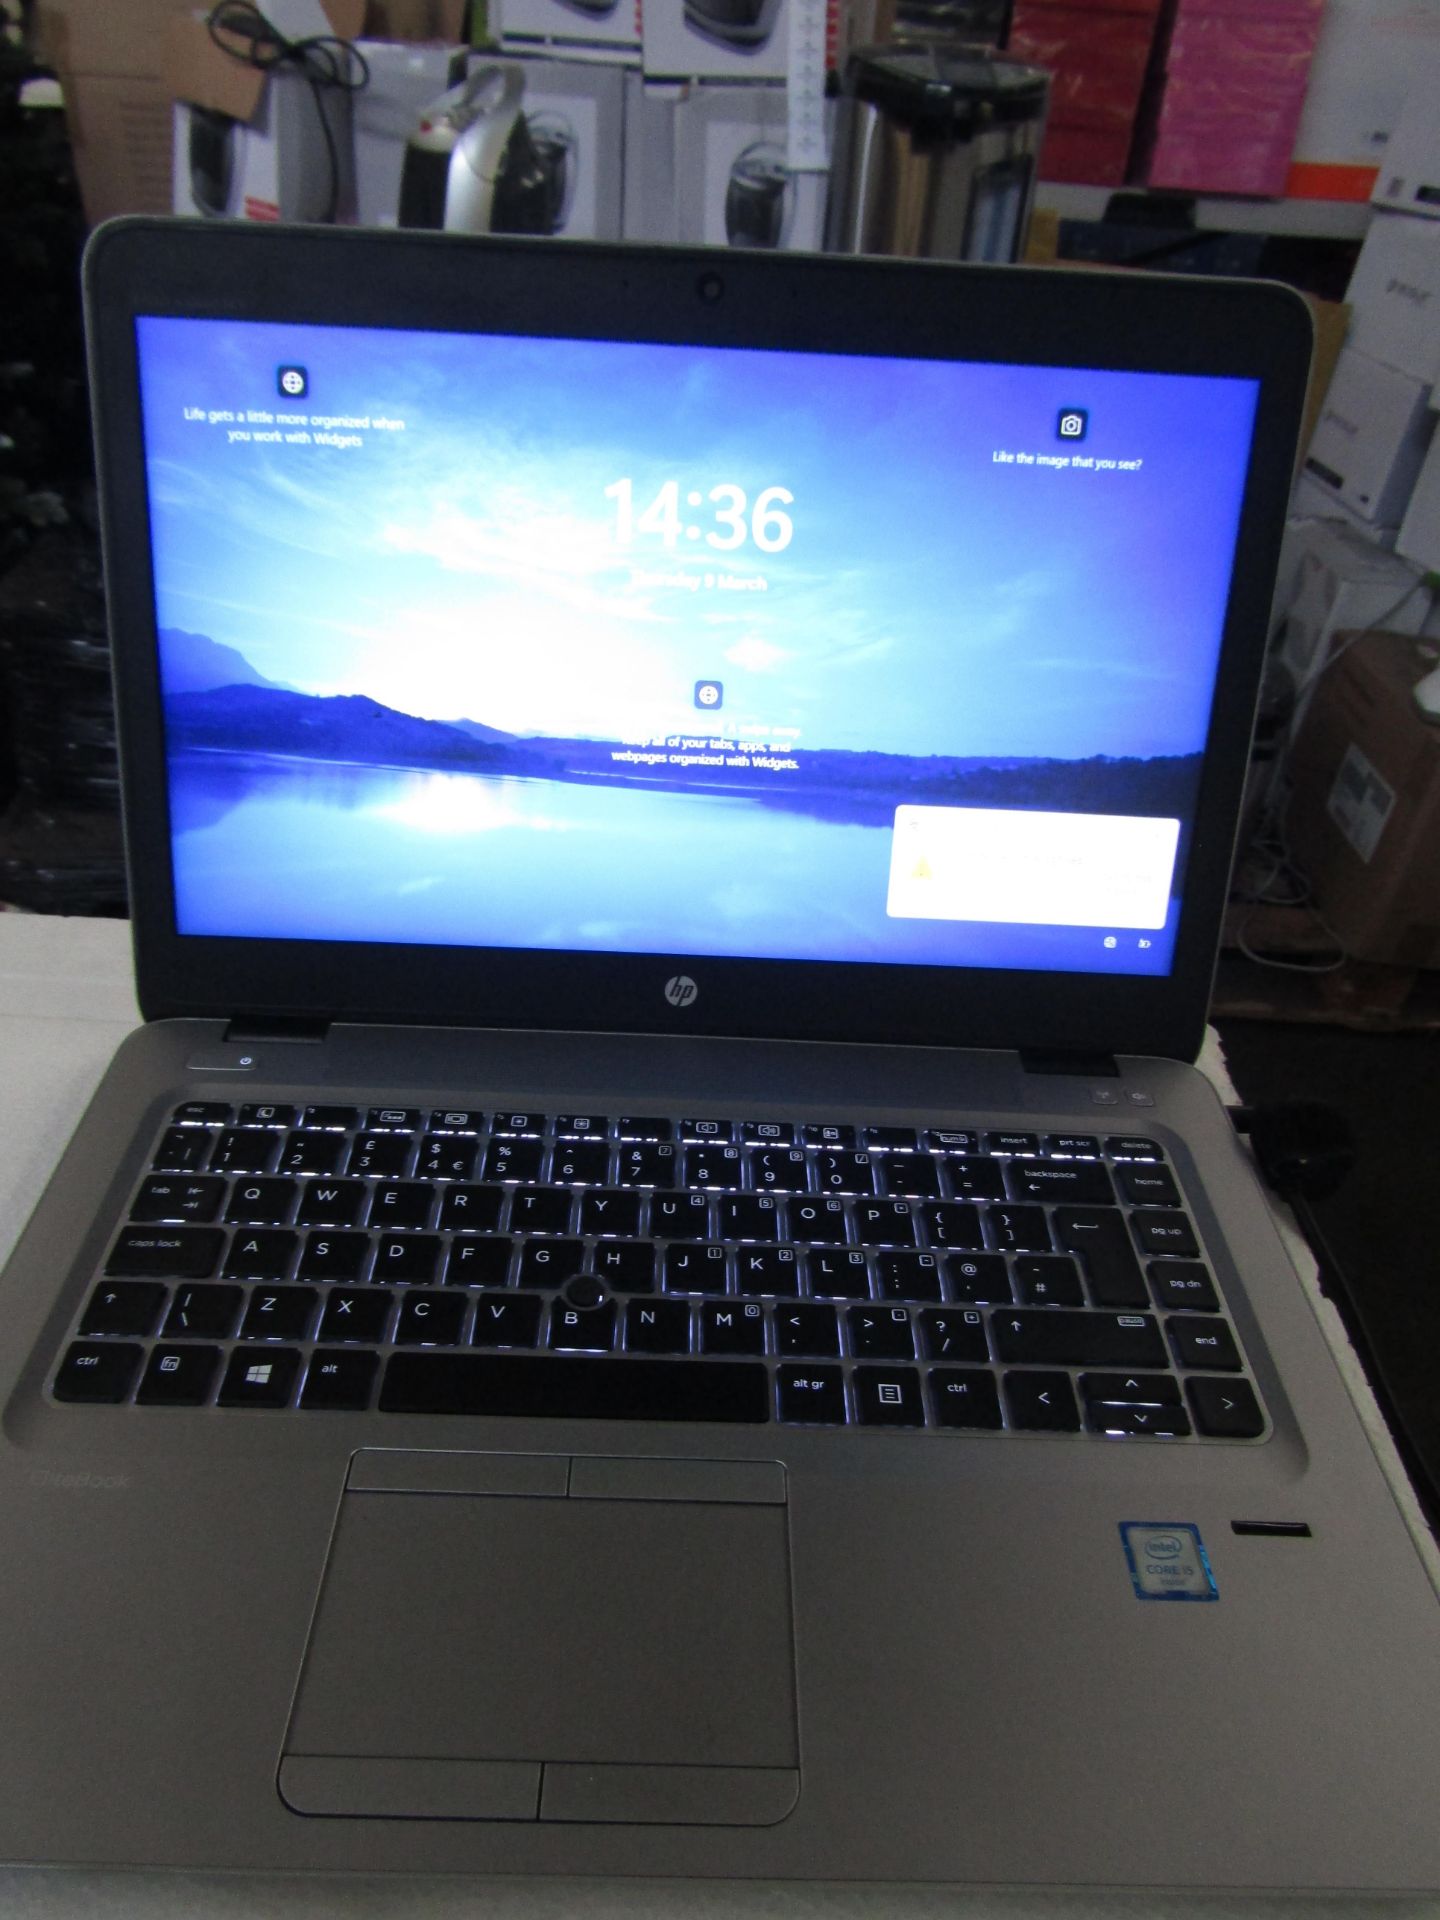 HP Elitebook 840 G3 core i5-6200U processor, 256gb disc and 8Gb ram, powers on and goes through to